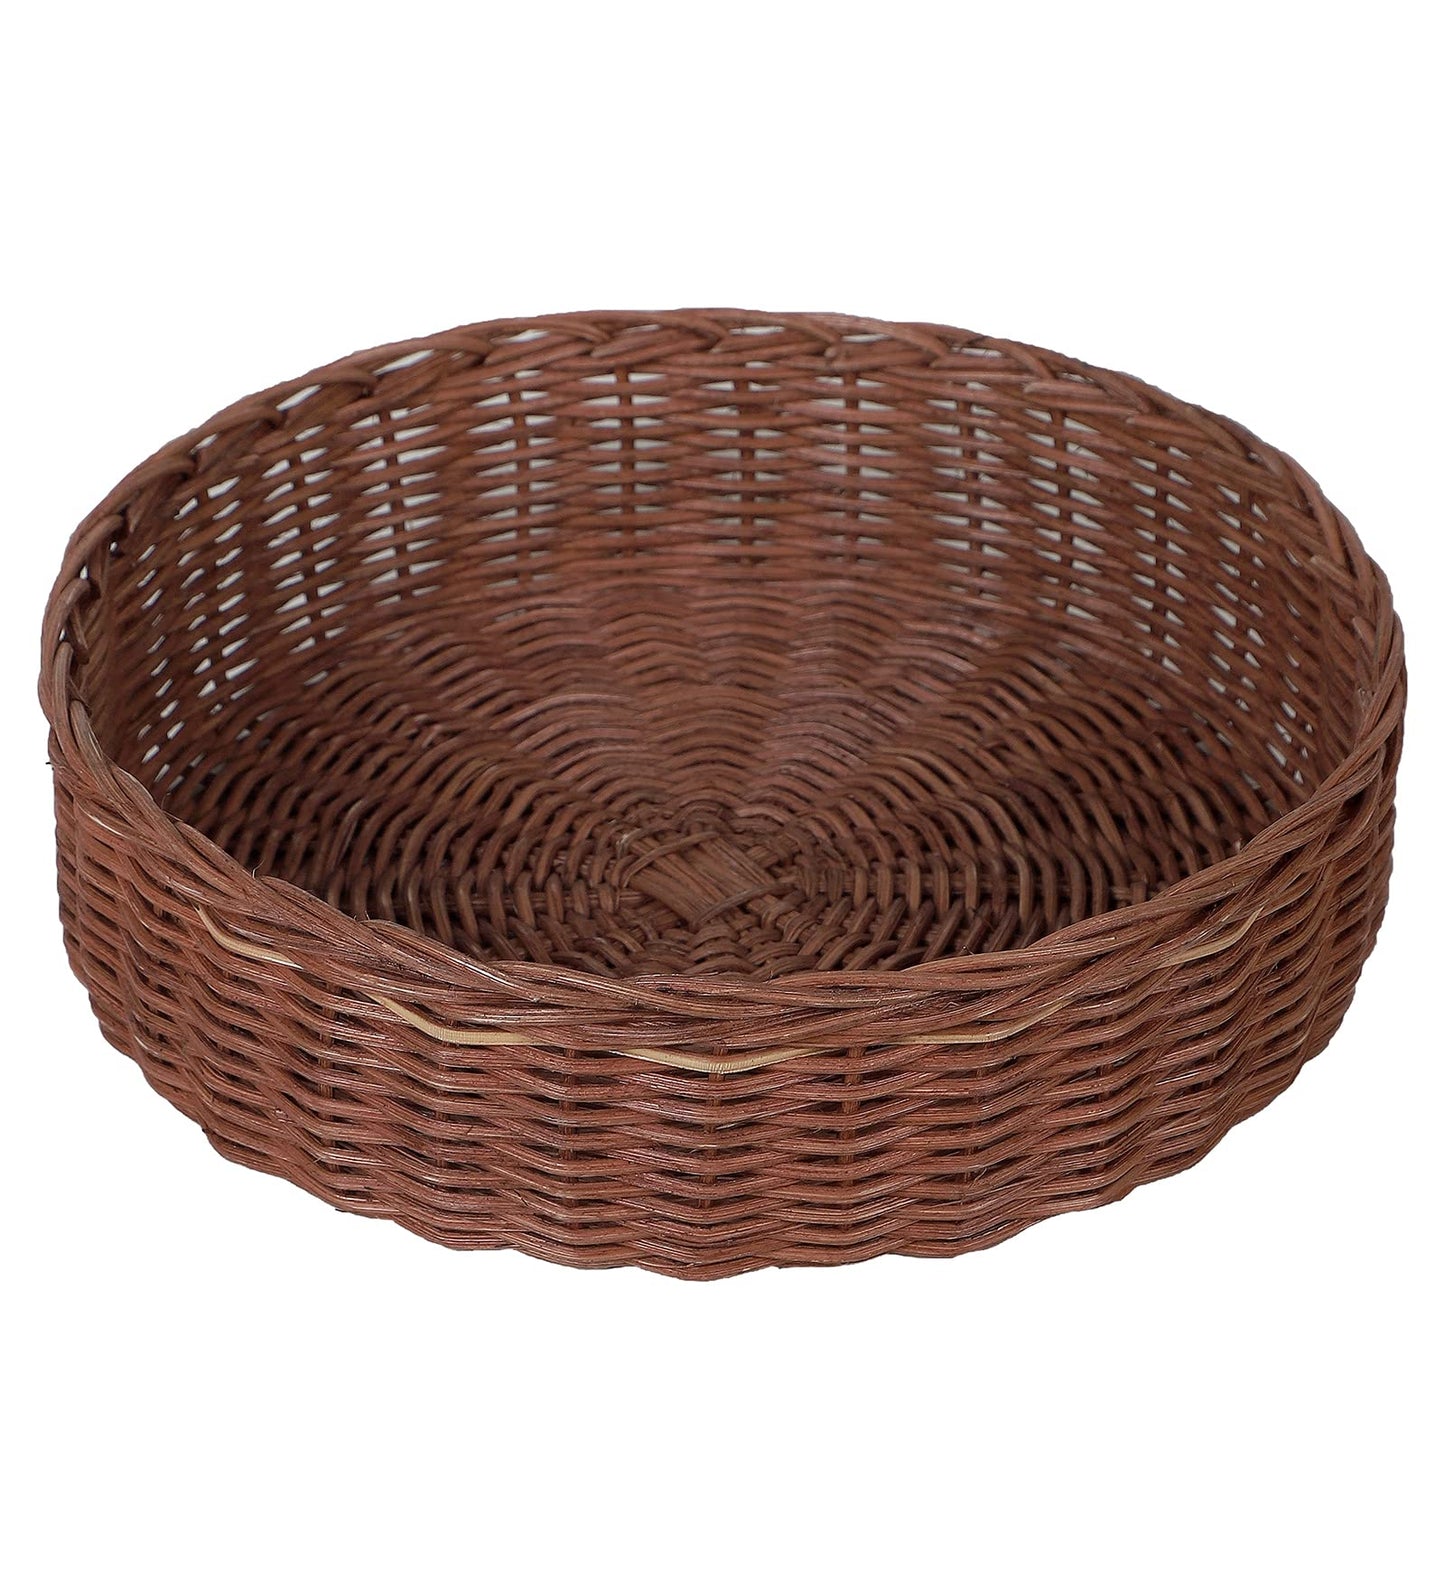 AKWAY Wicker Serving Tray Wooden Serving Tray for Home | Dining Table Decorative Trays | Serving Tray for Party Guests | Platter with Handles Diwali or Deepawali Gifts | 10 x 10 x 2 (Brown) - Akway